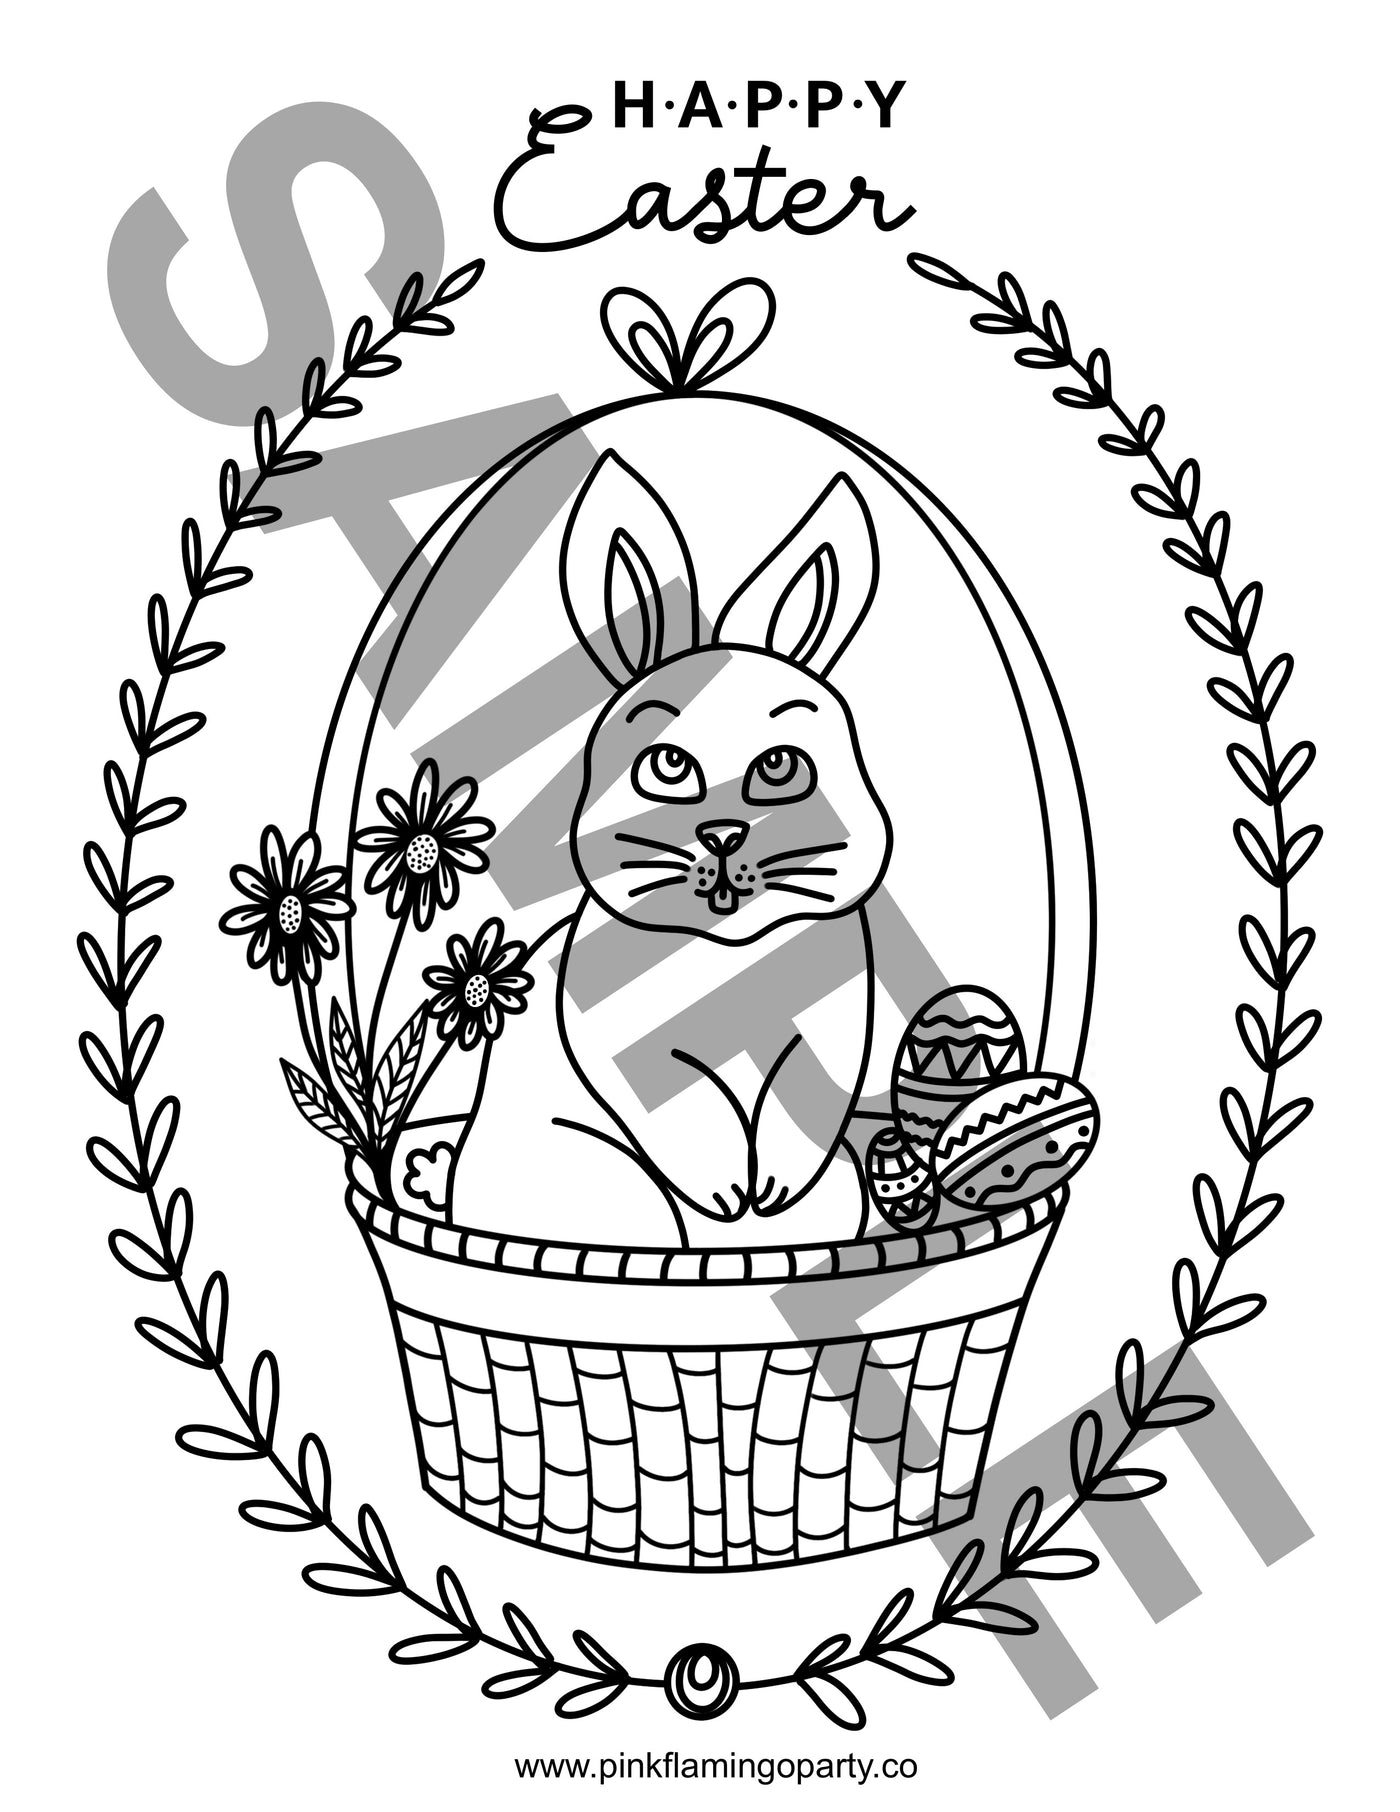 Happy Easter Bunny in a Basket FREE printable coloring sheet